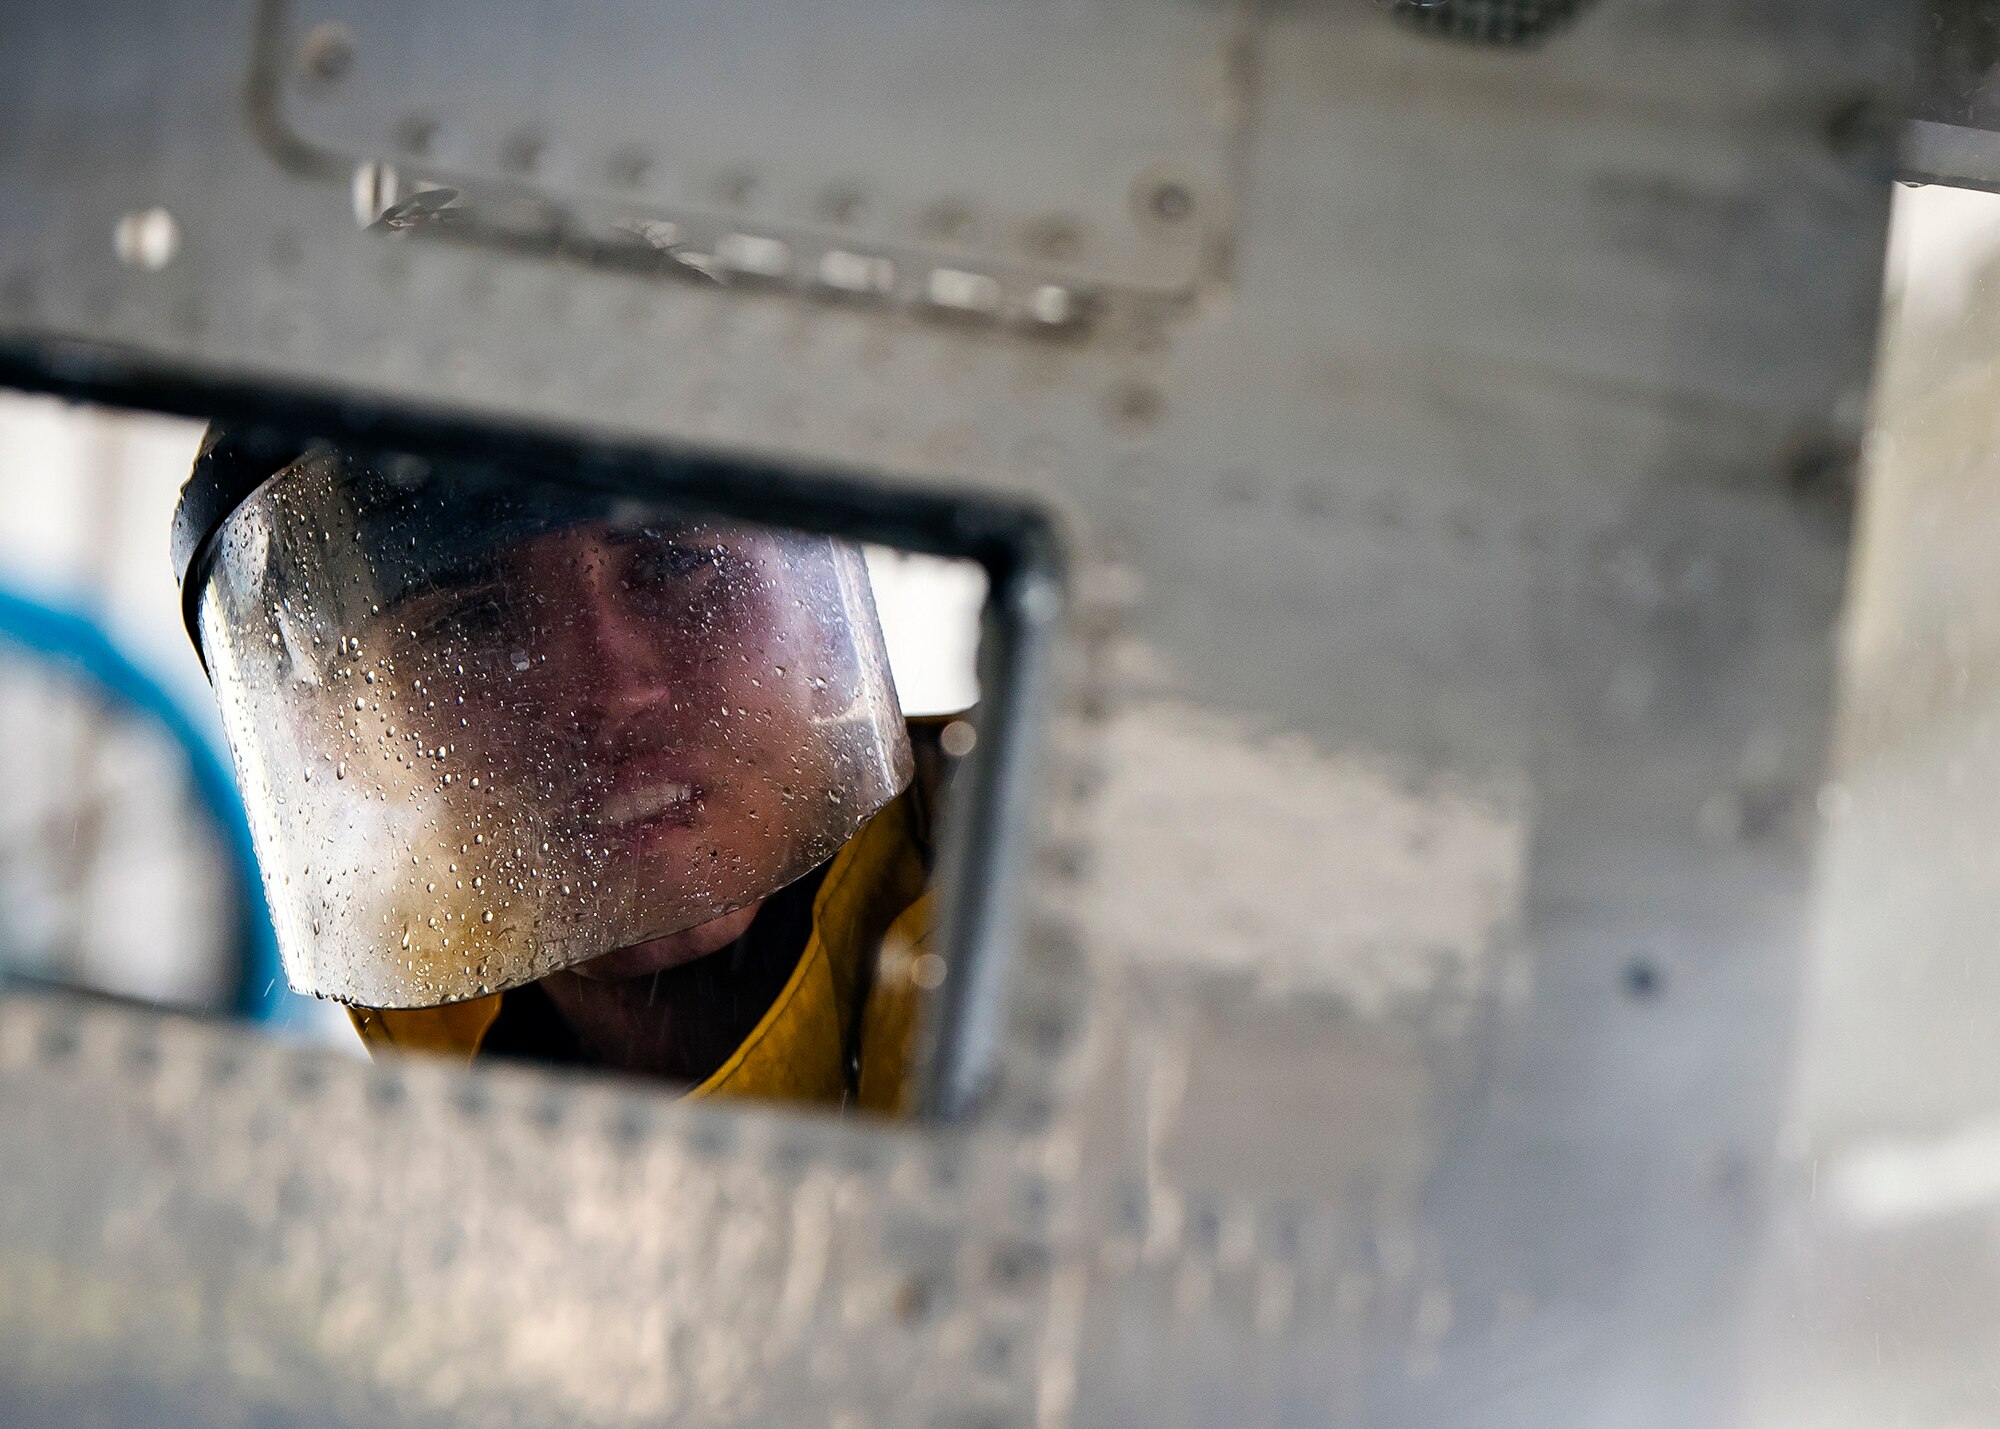 Airman 1st Class Benjamin Jones, 74th Aircraft Maintenance Unit crew chief, washes a panel on an A-10C Thunderbolt II, Feb. 25, 2019, at Moody Air Force Base, Ga. To guarantee Moody’s fleet of 49 A-10C Thunderbolt II’s are in peak warfighting condition, Airmen from the 23d Maintenance Group dedicated over 10 hours washing each A-10 to ensure the aircraft was free of any surface or structural deficiencies that could present a safety hazard during flight. (U.S. Air Force photo by Airman 1st Class Eugene Oliver)